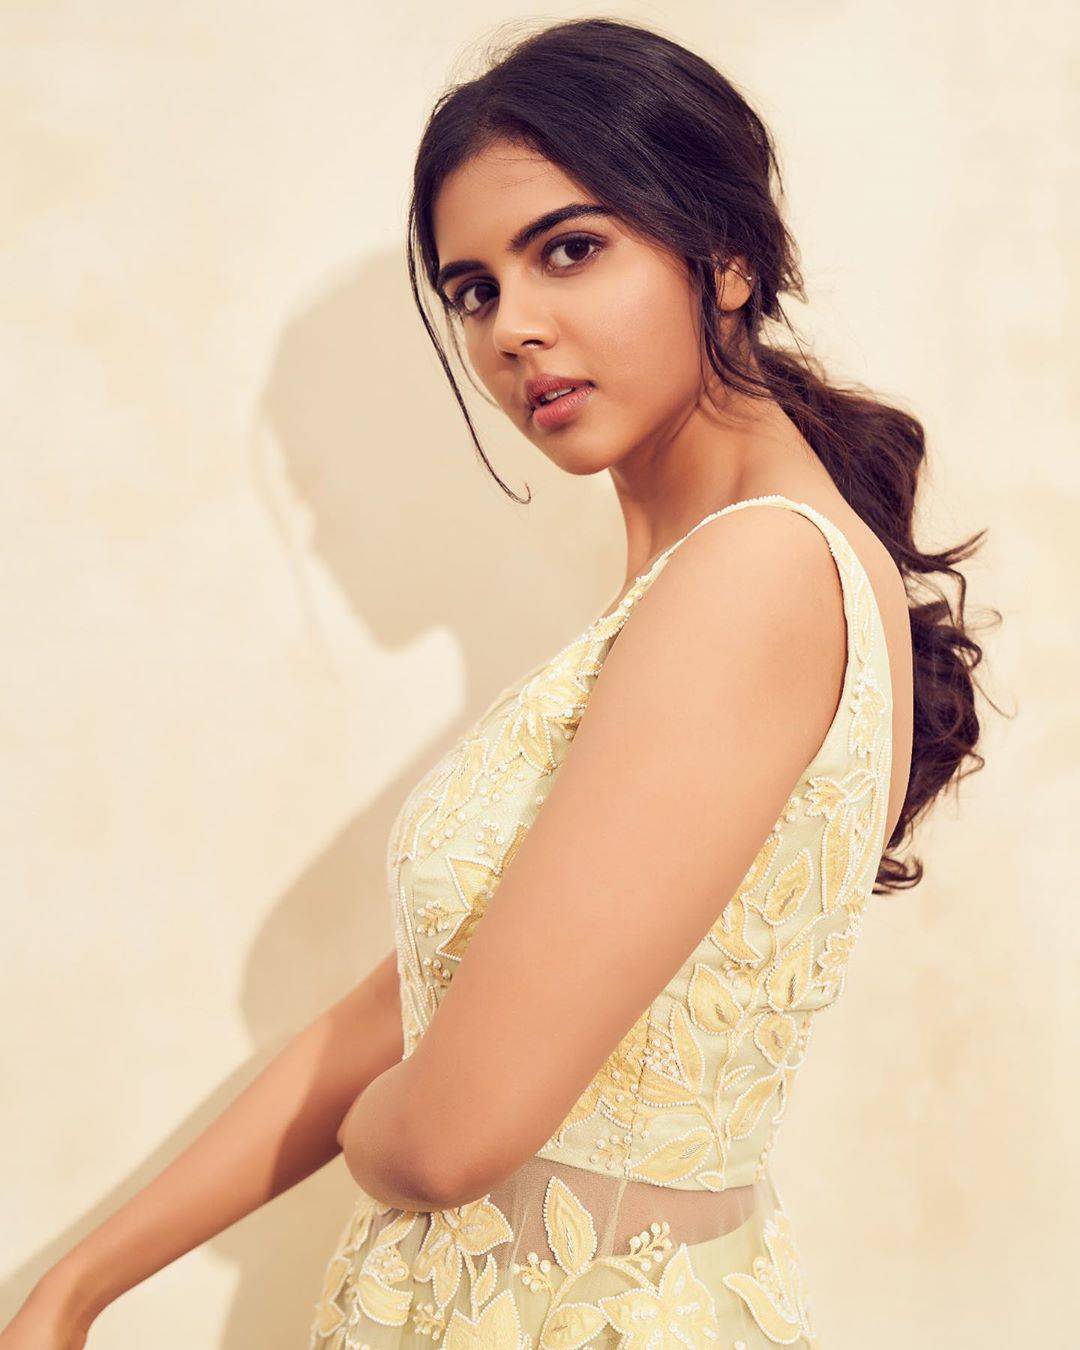 Make-up artist Amit Kagda chose to go with a natural look and hairstylist Chinna drew the hair back into a low ponytail while leaving some flyaway bangs - Fashion Models